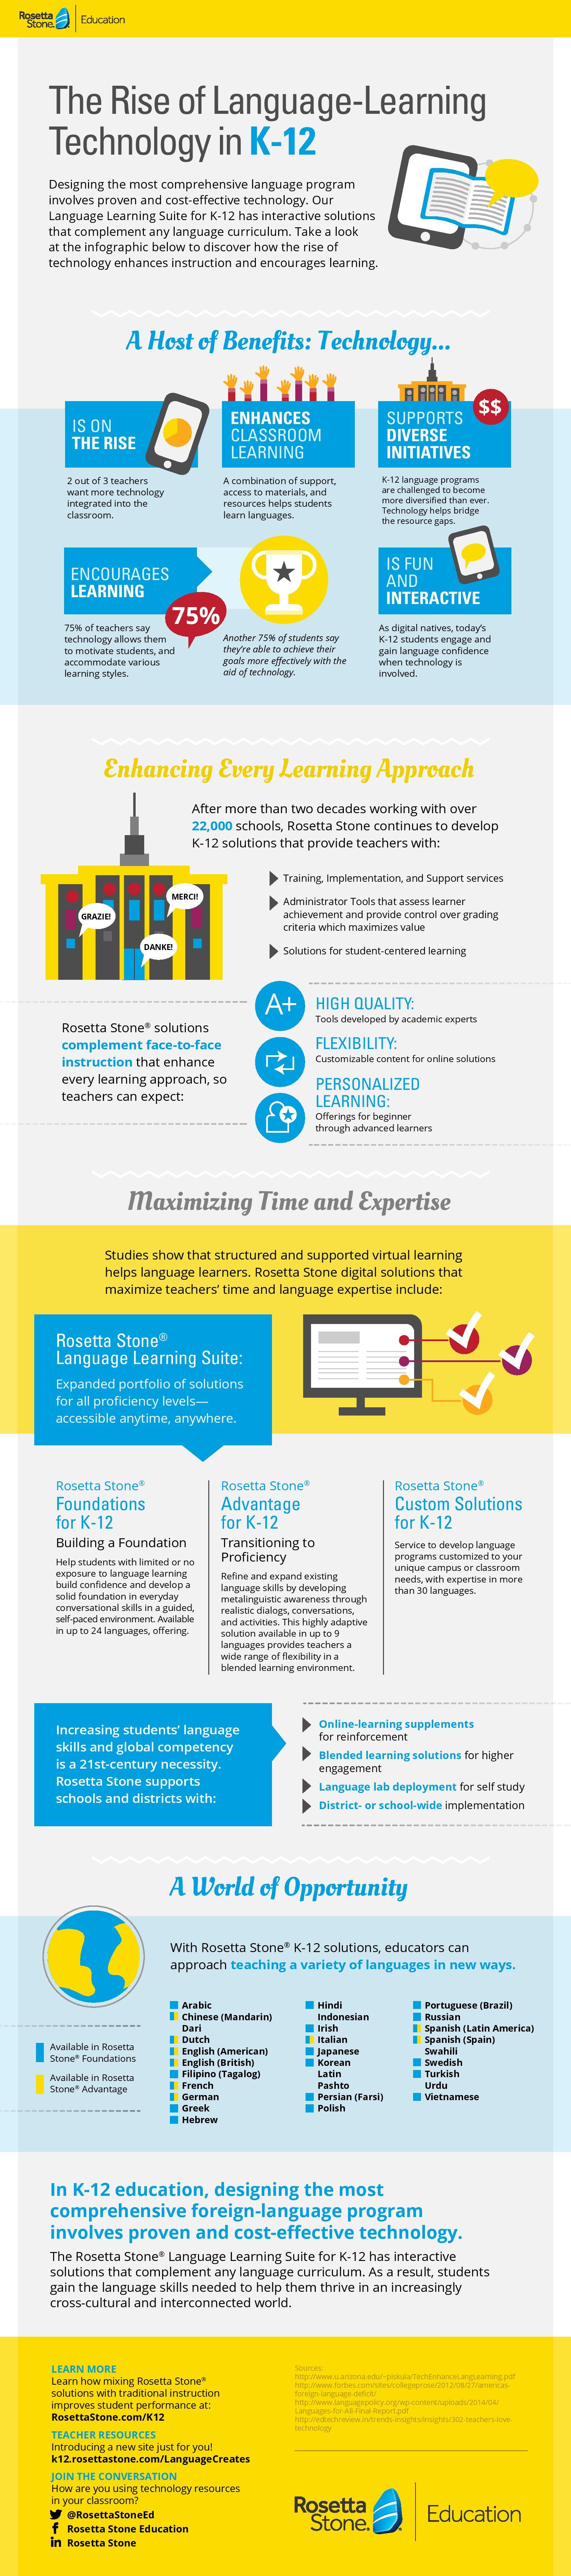 The Rise of Language Learning Technology in K12 Infographic